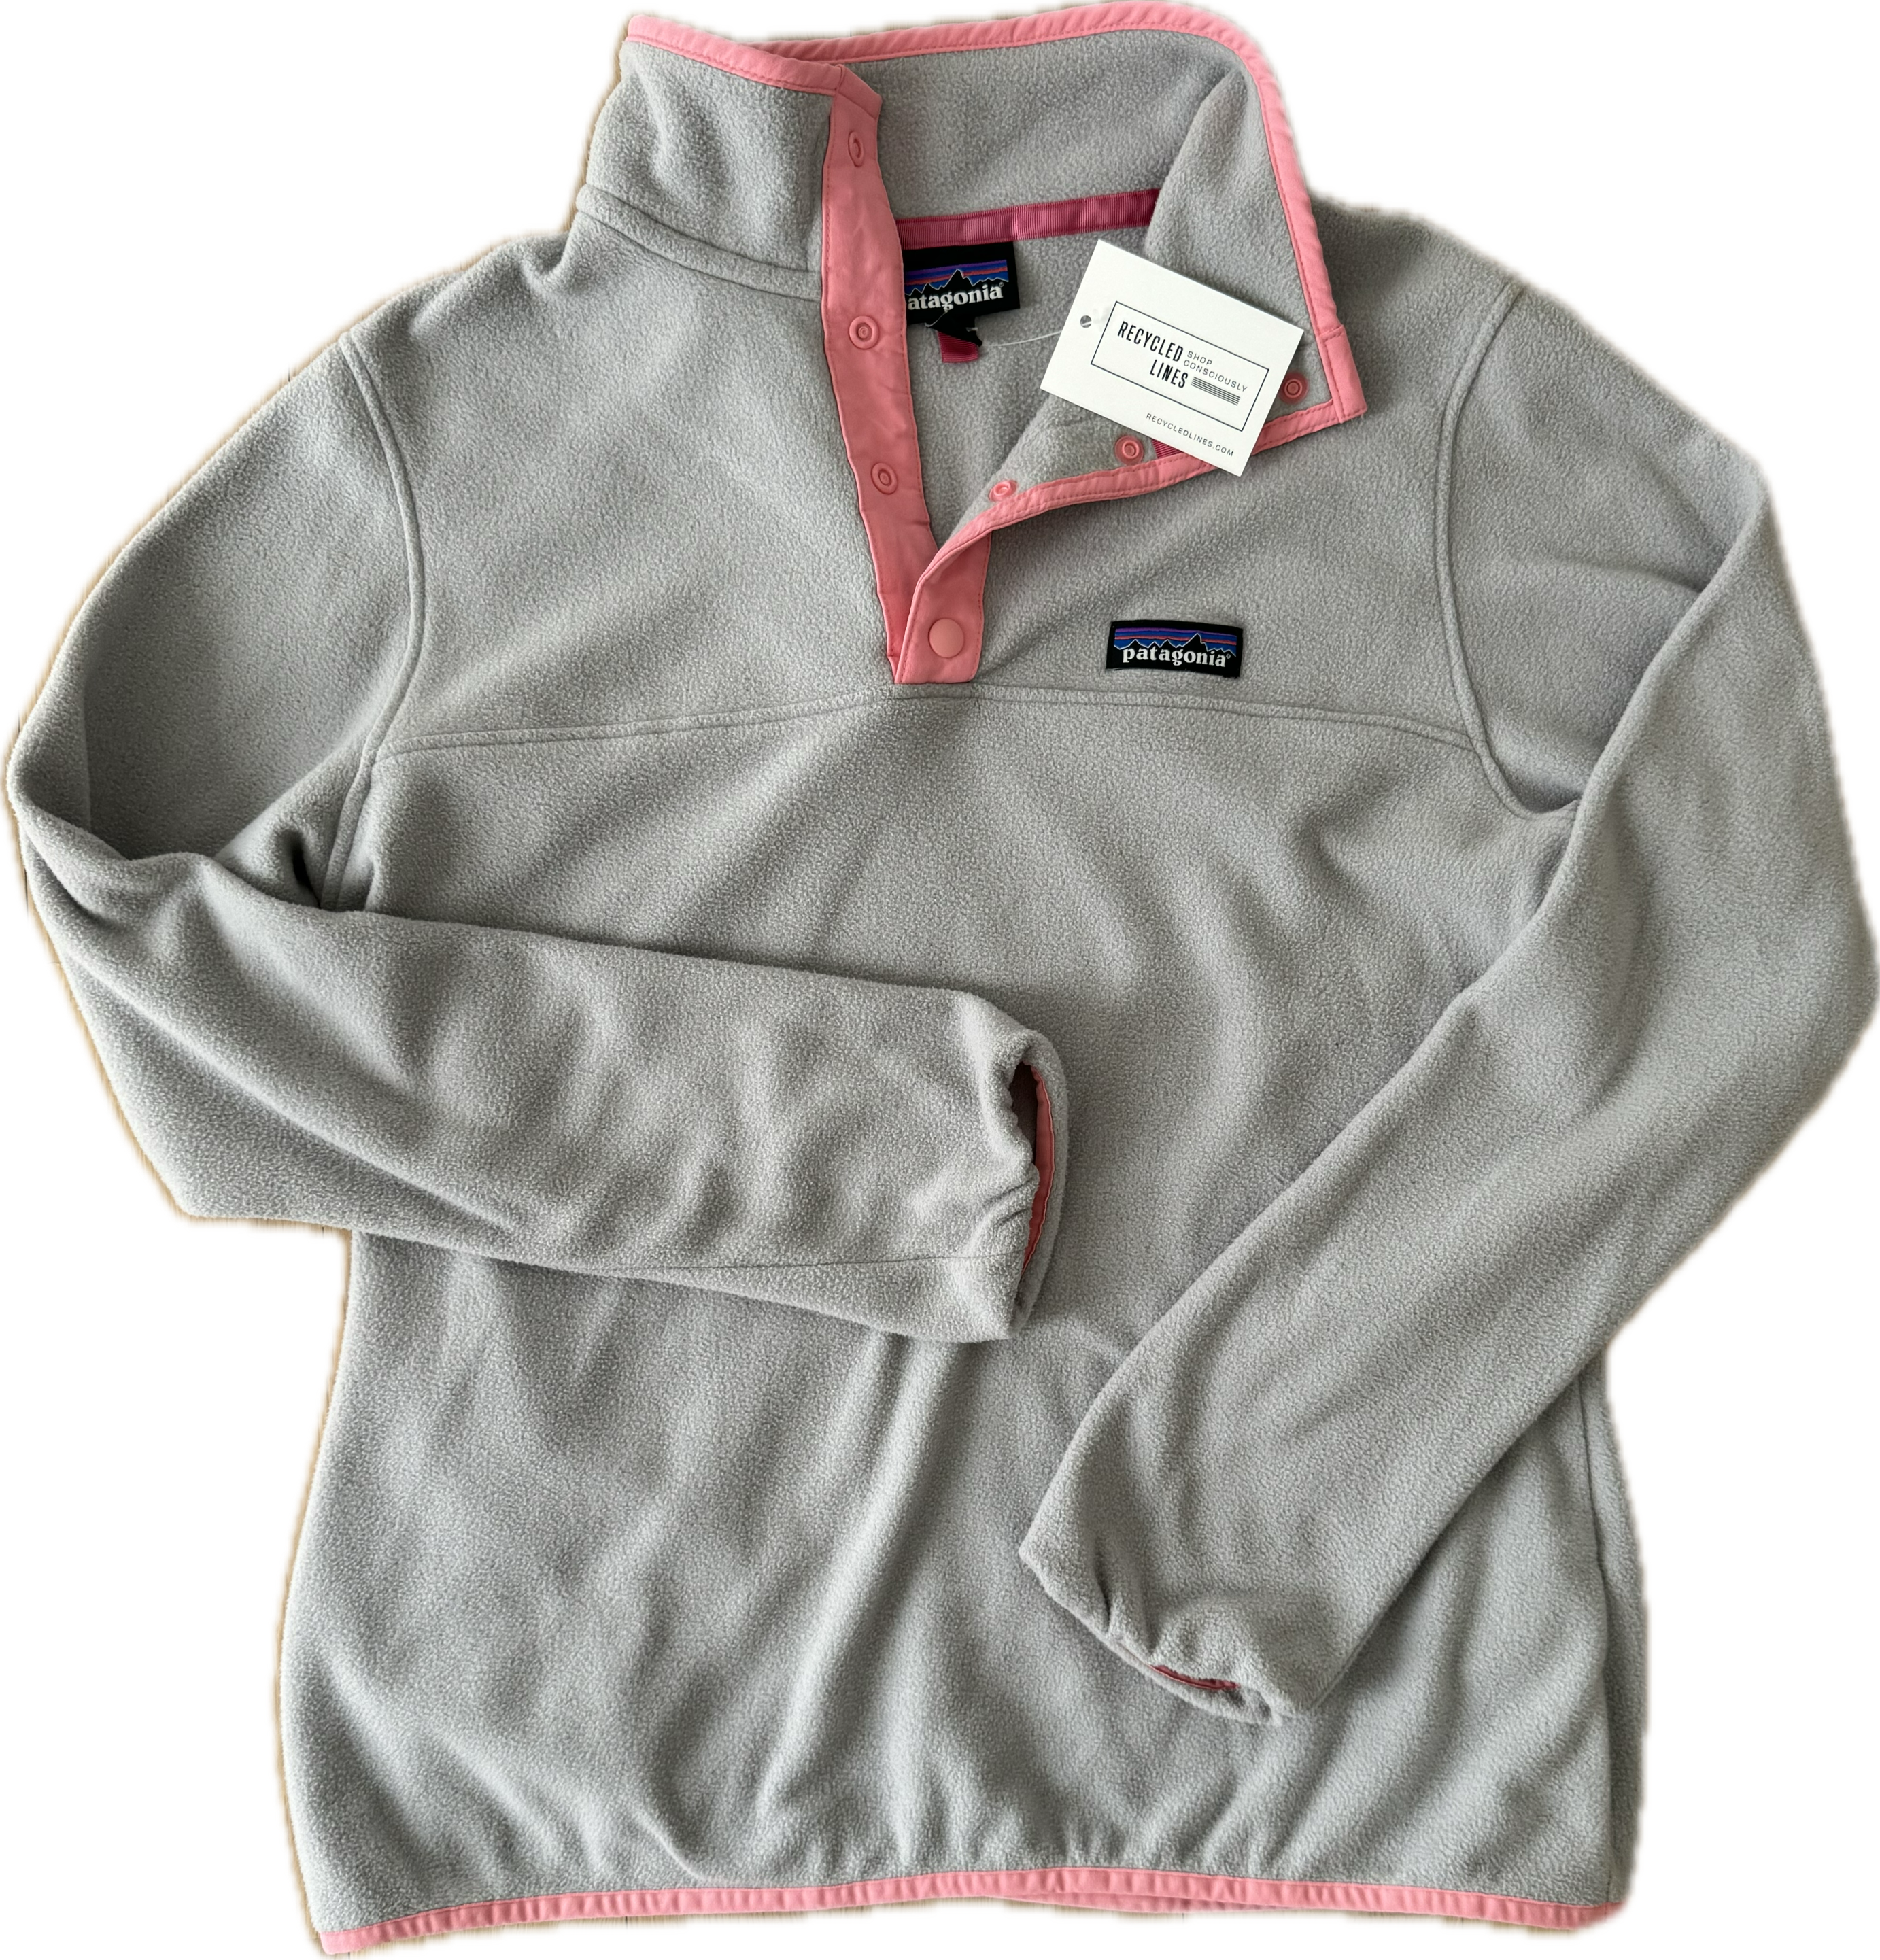 Patagonia 1/4 Zip Pullover, Grey Womens Size M